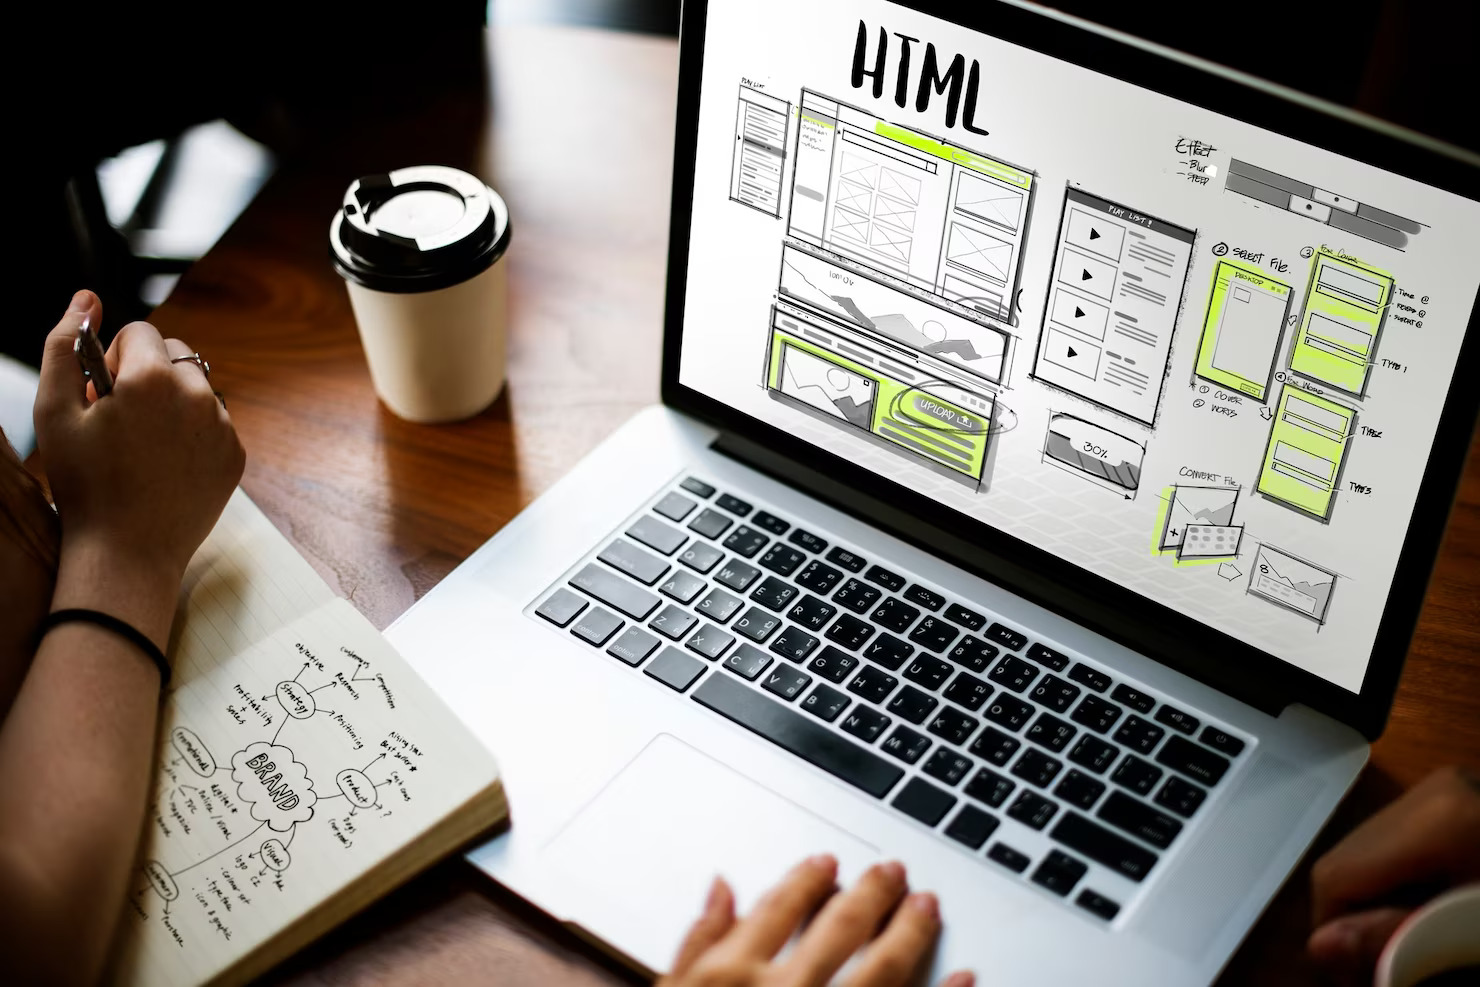 Online web design. Web designer creating visual elements on paper and on a laptop screen